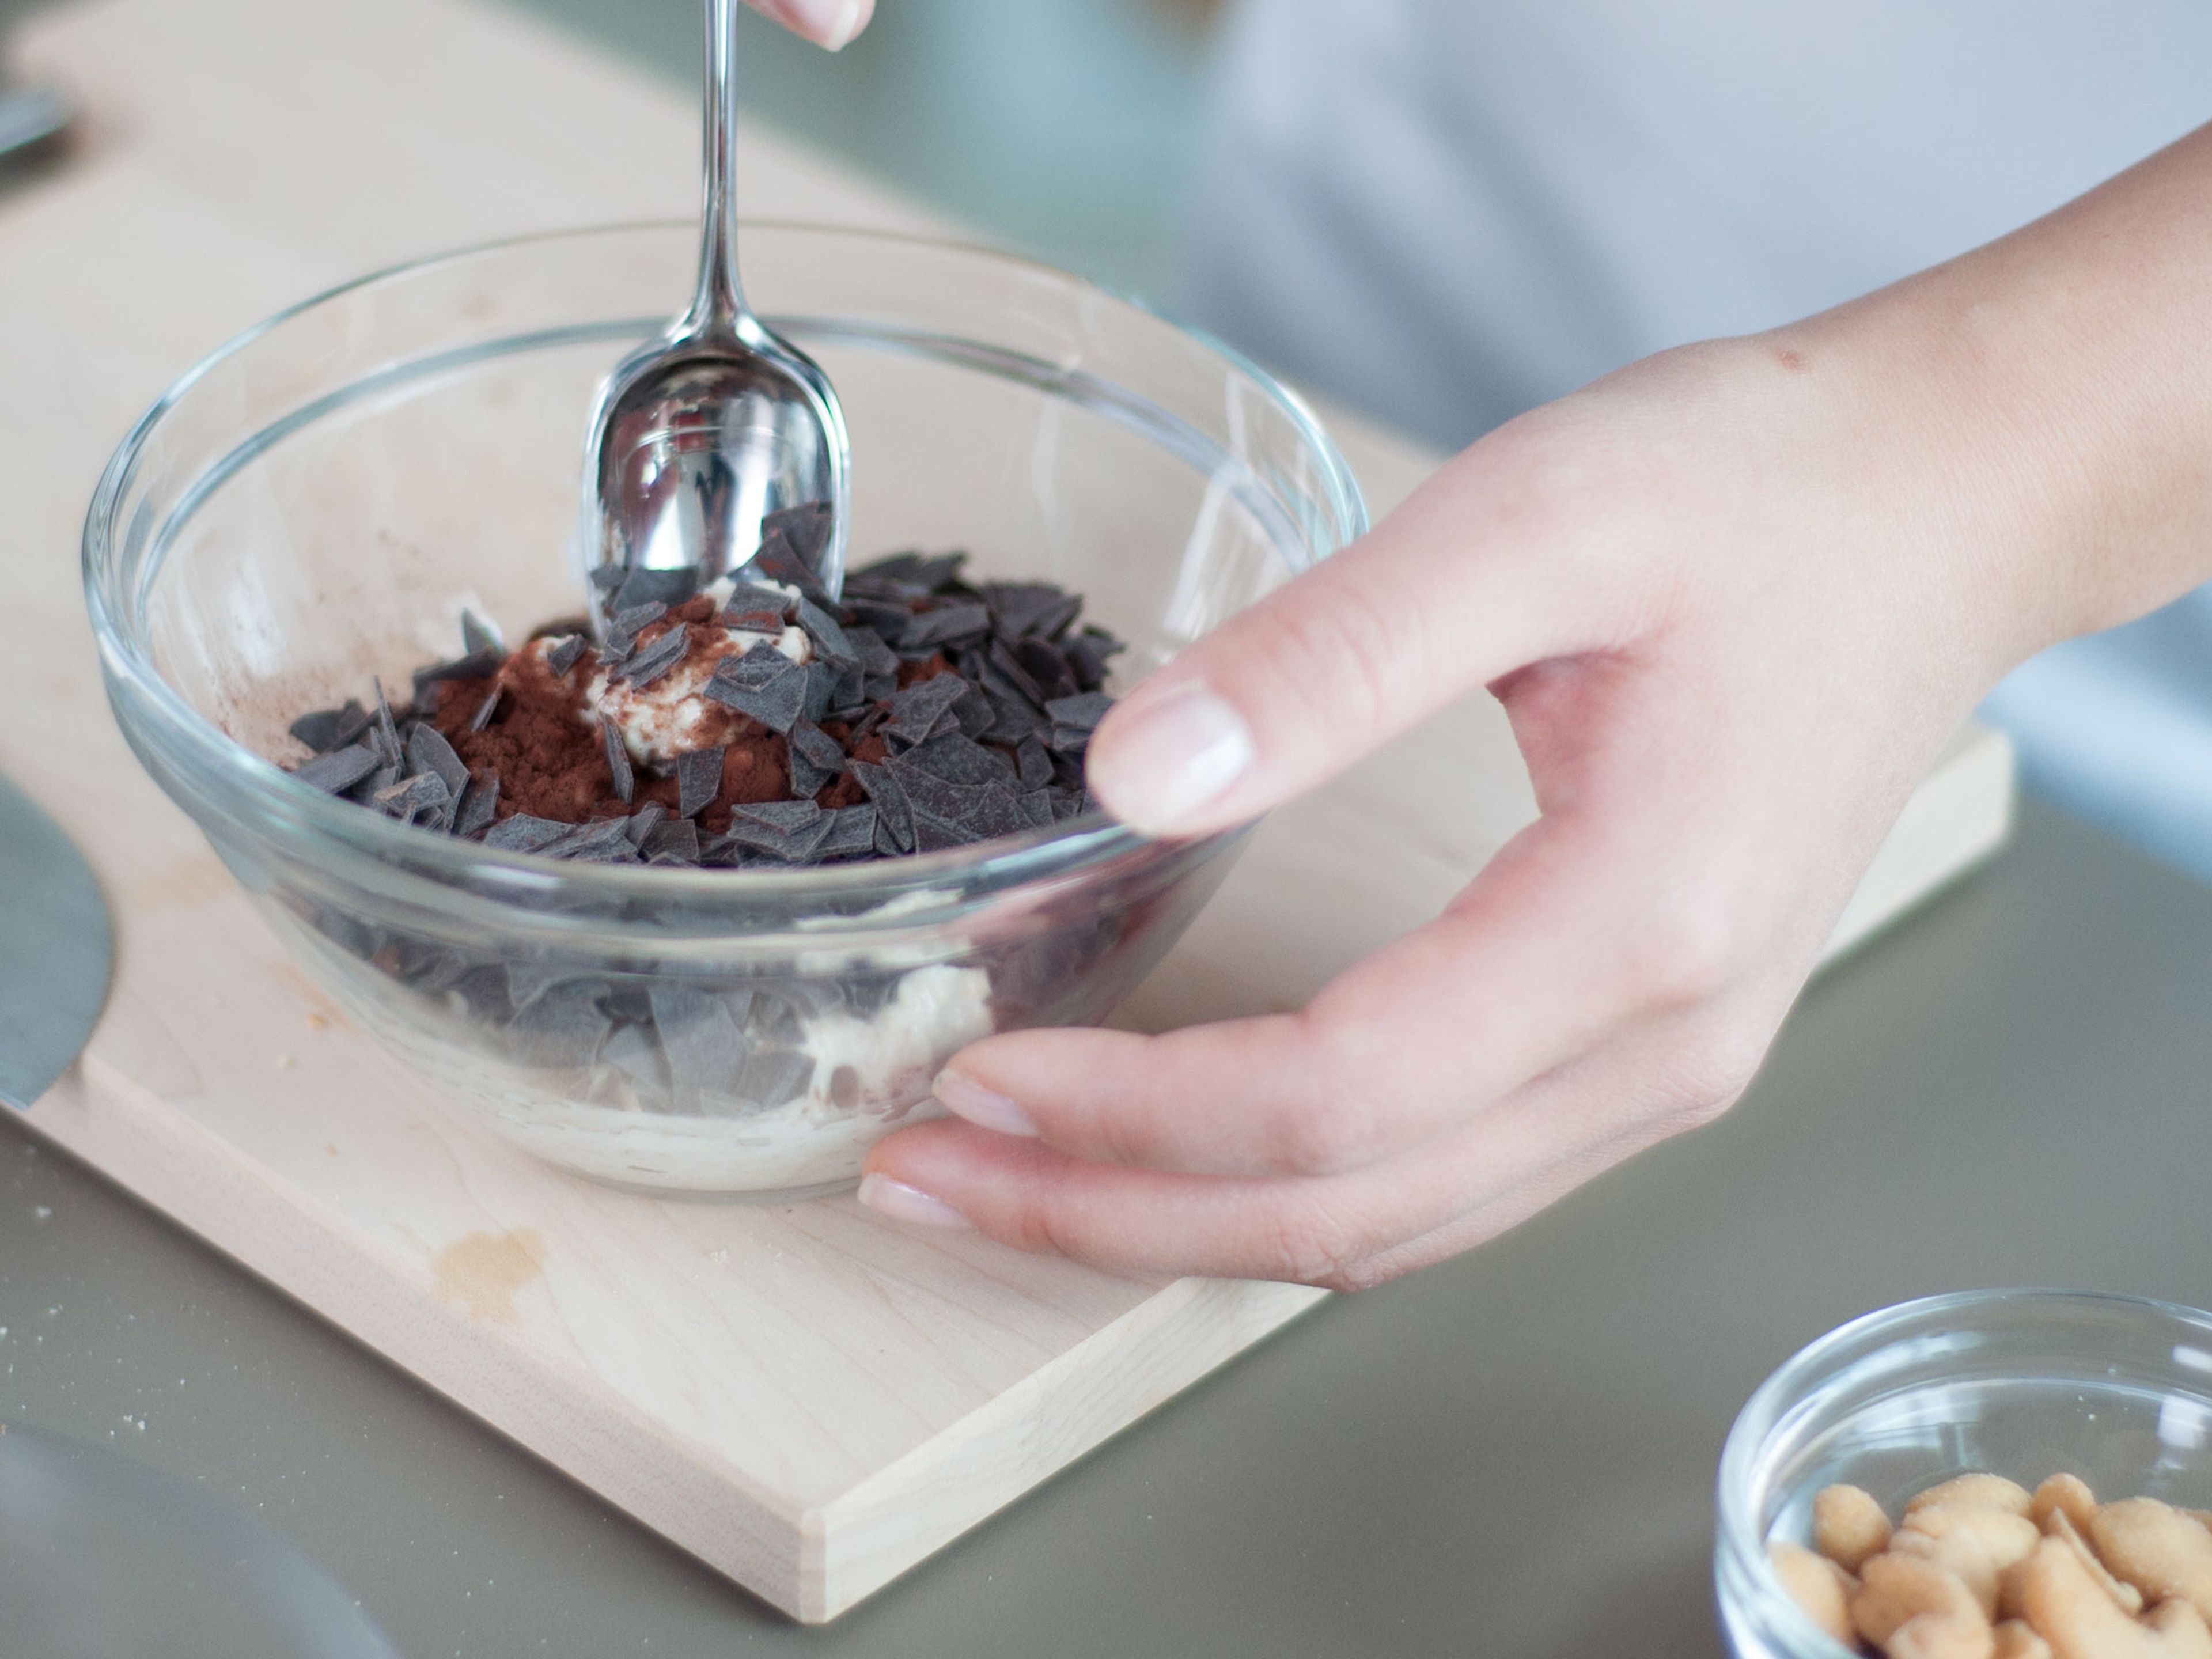 For cocoa topping, slice banana. Then stir cocoa powder and two thirds of the chocolate shavings into one third of the oat mixture. Transfer to a serving glass and top with banana slices and one third of the chocolate shavings.